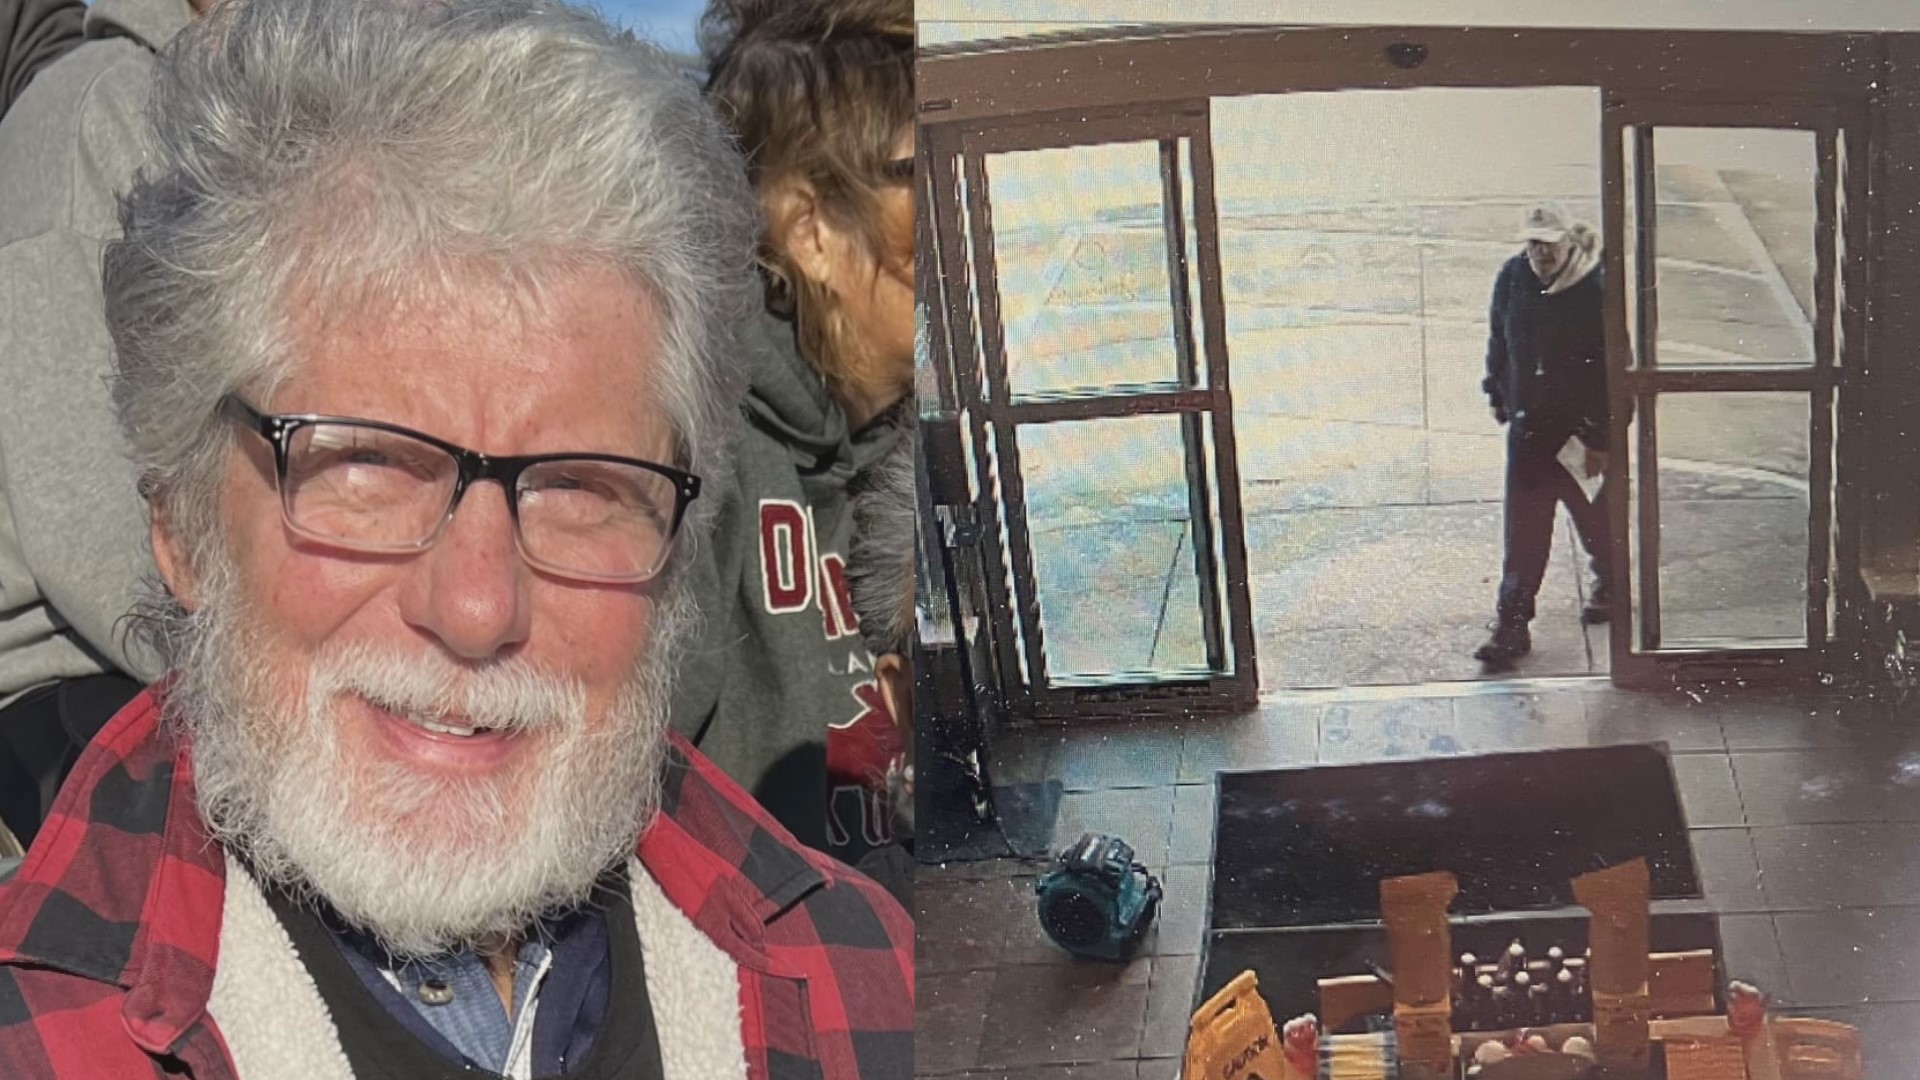 Ray Tarasiewicz, a 69-year-old Wyoming man, has been missing for more than a month now.